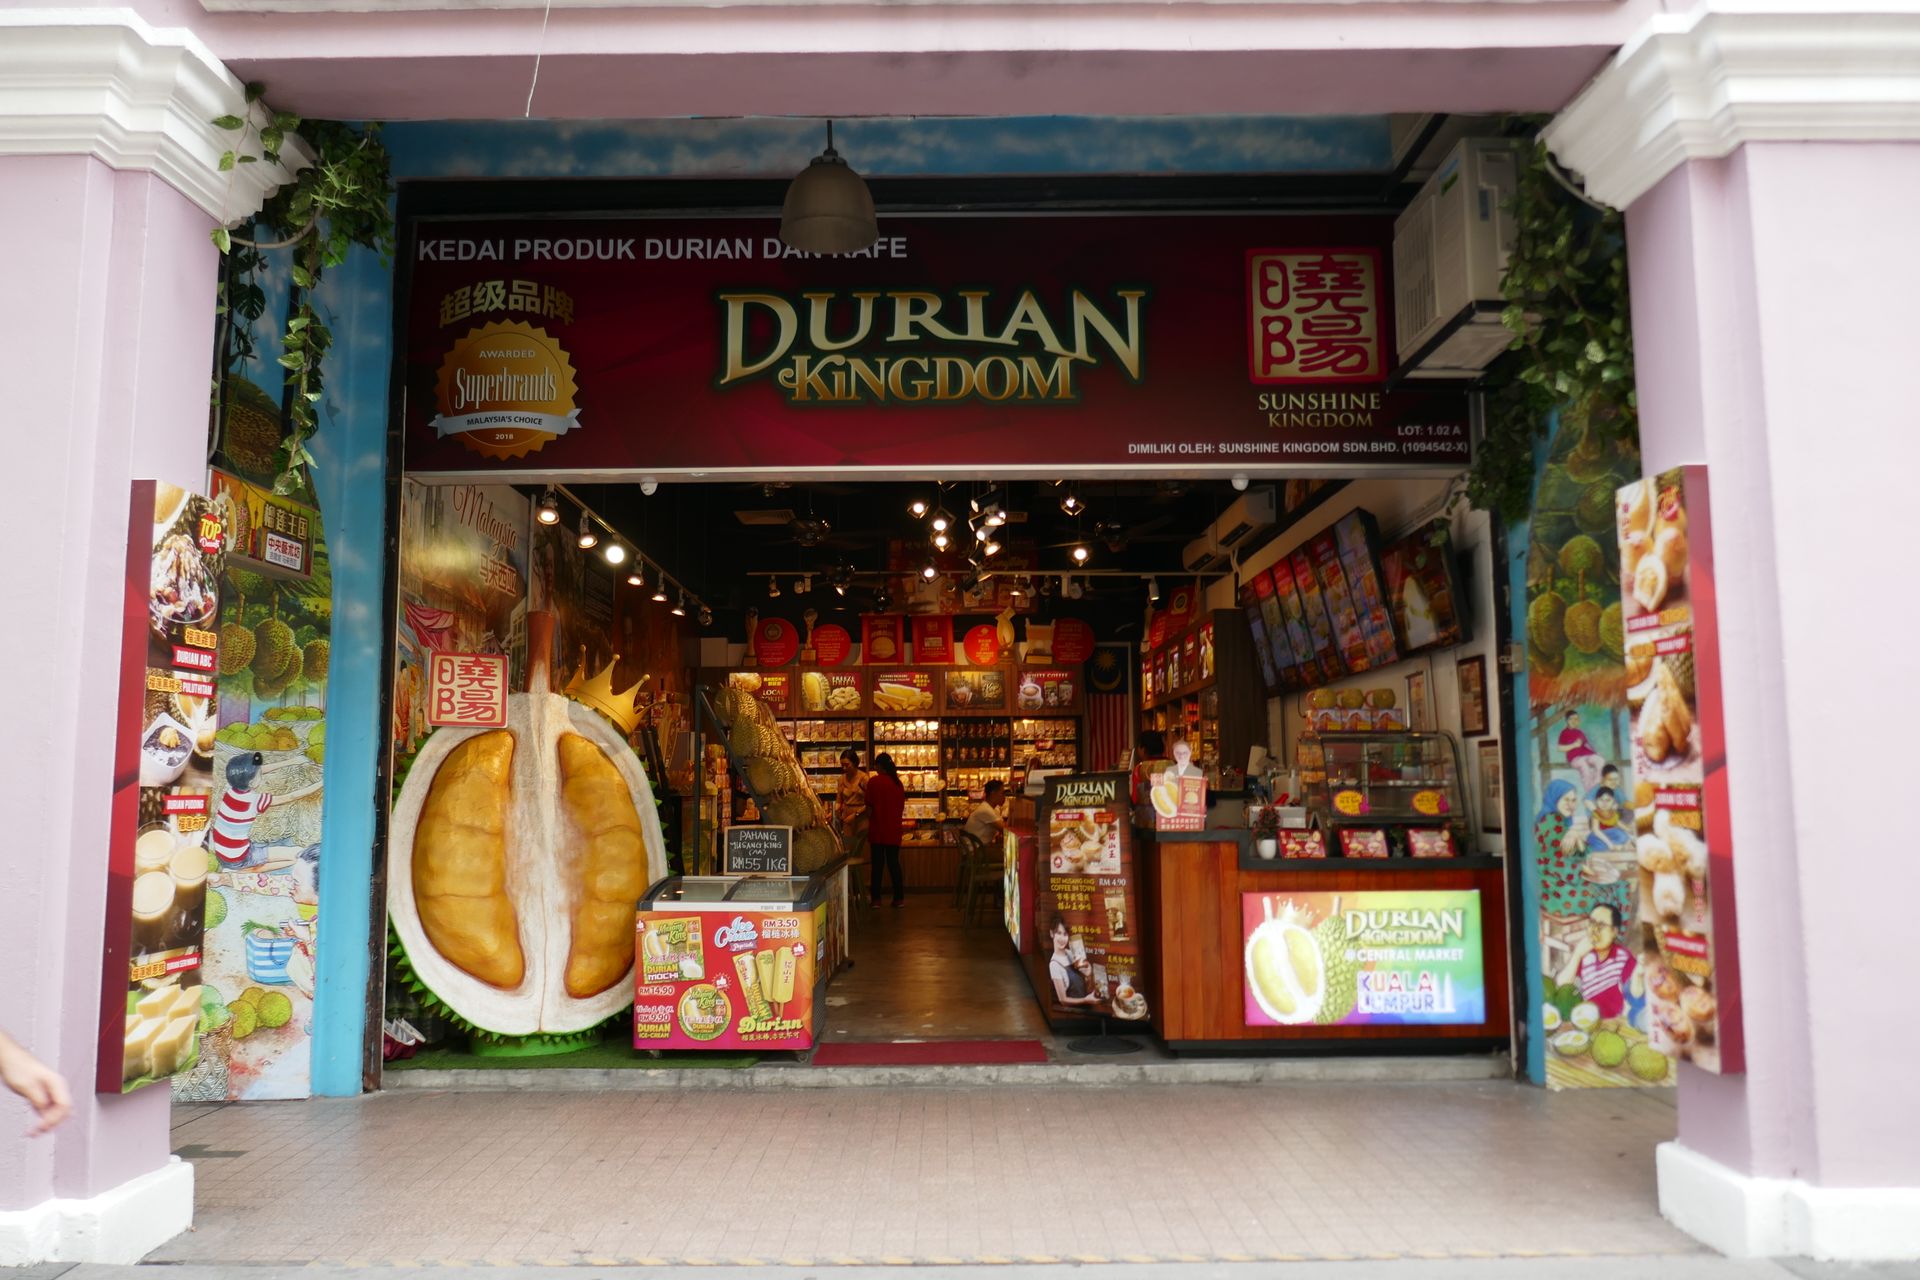 Durian - that